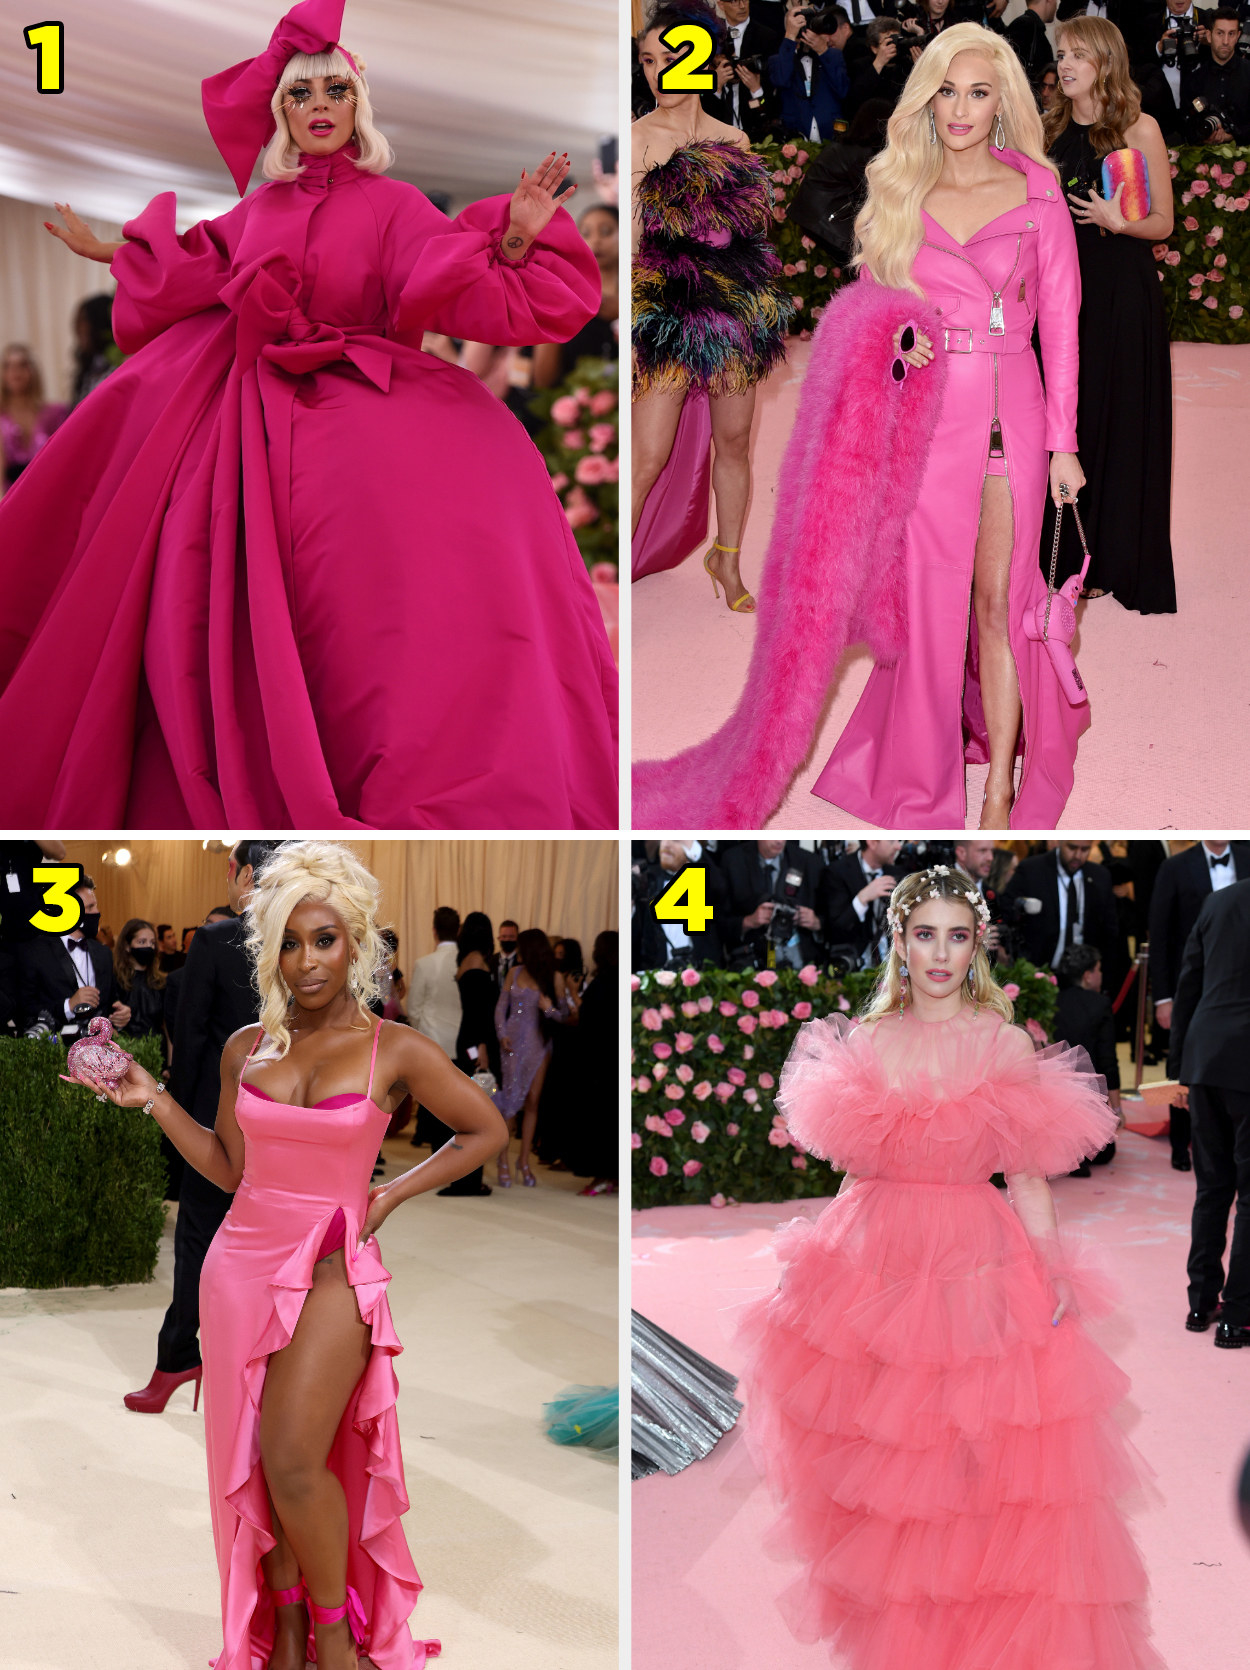 1. A ballgown tied at the waist with a matching hair bow. 2. A leatherjacket dress with a slit on the thigh and a feather boa. 3. A sleeveless gown with ruffles and a slit all the way up to the waist. 4. A tiered poofy ruffled gown.